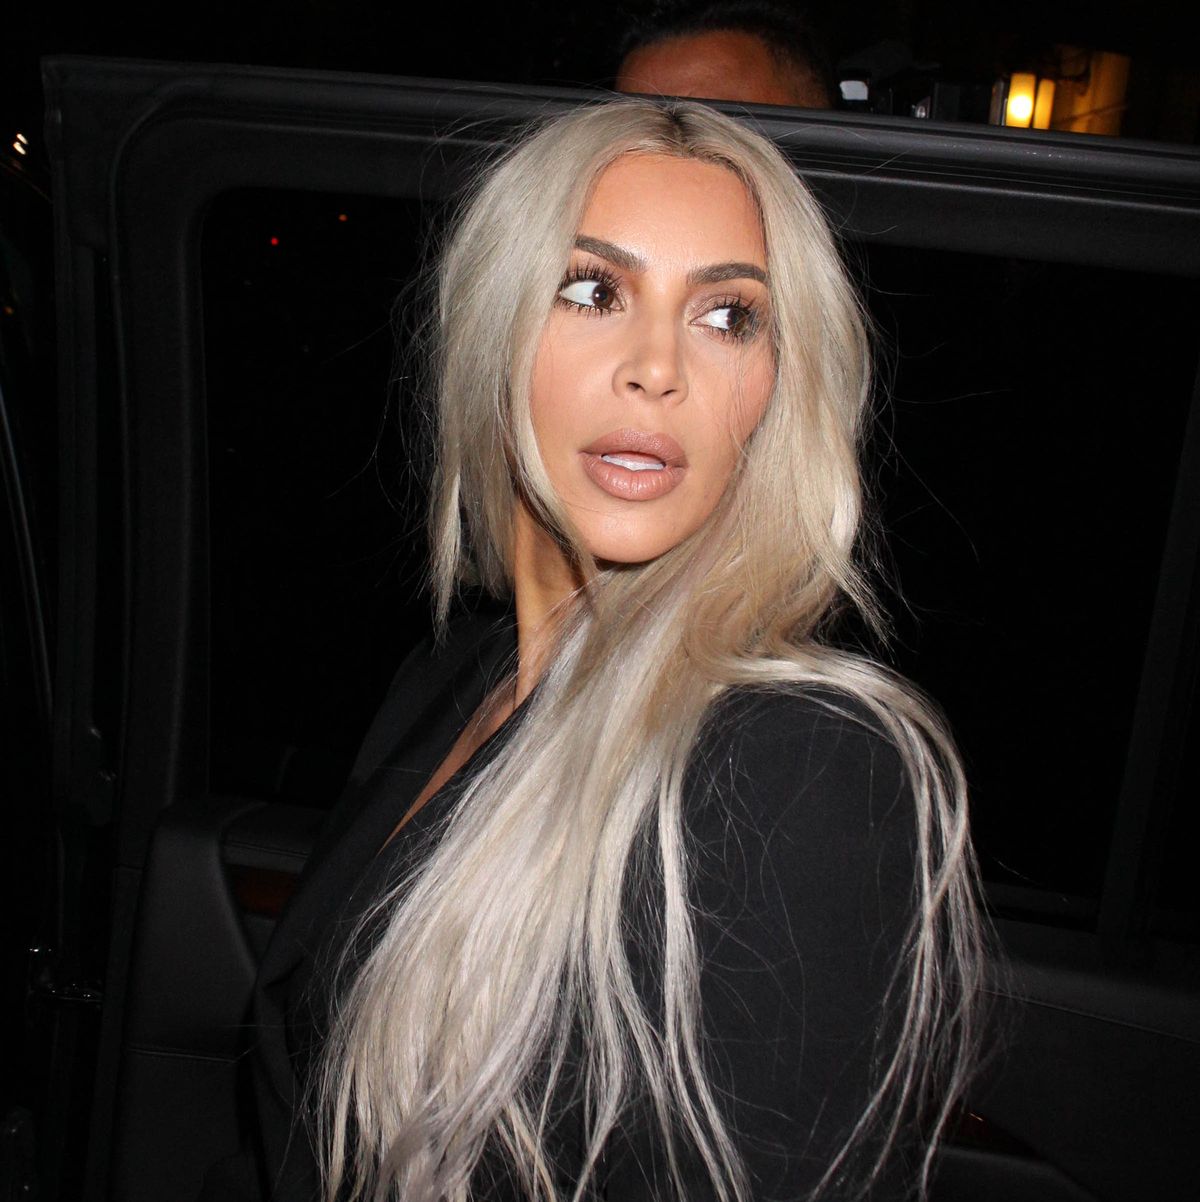 How Kim Kardashian Reportedly Reacted to Kylie Jenner's Pregnancy